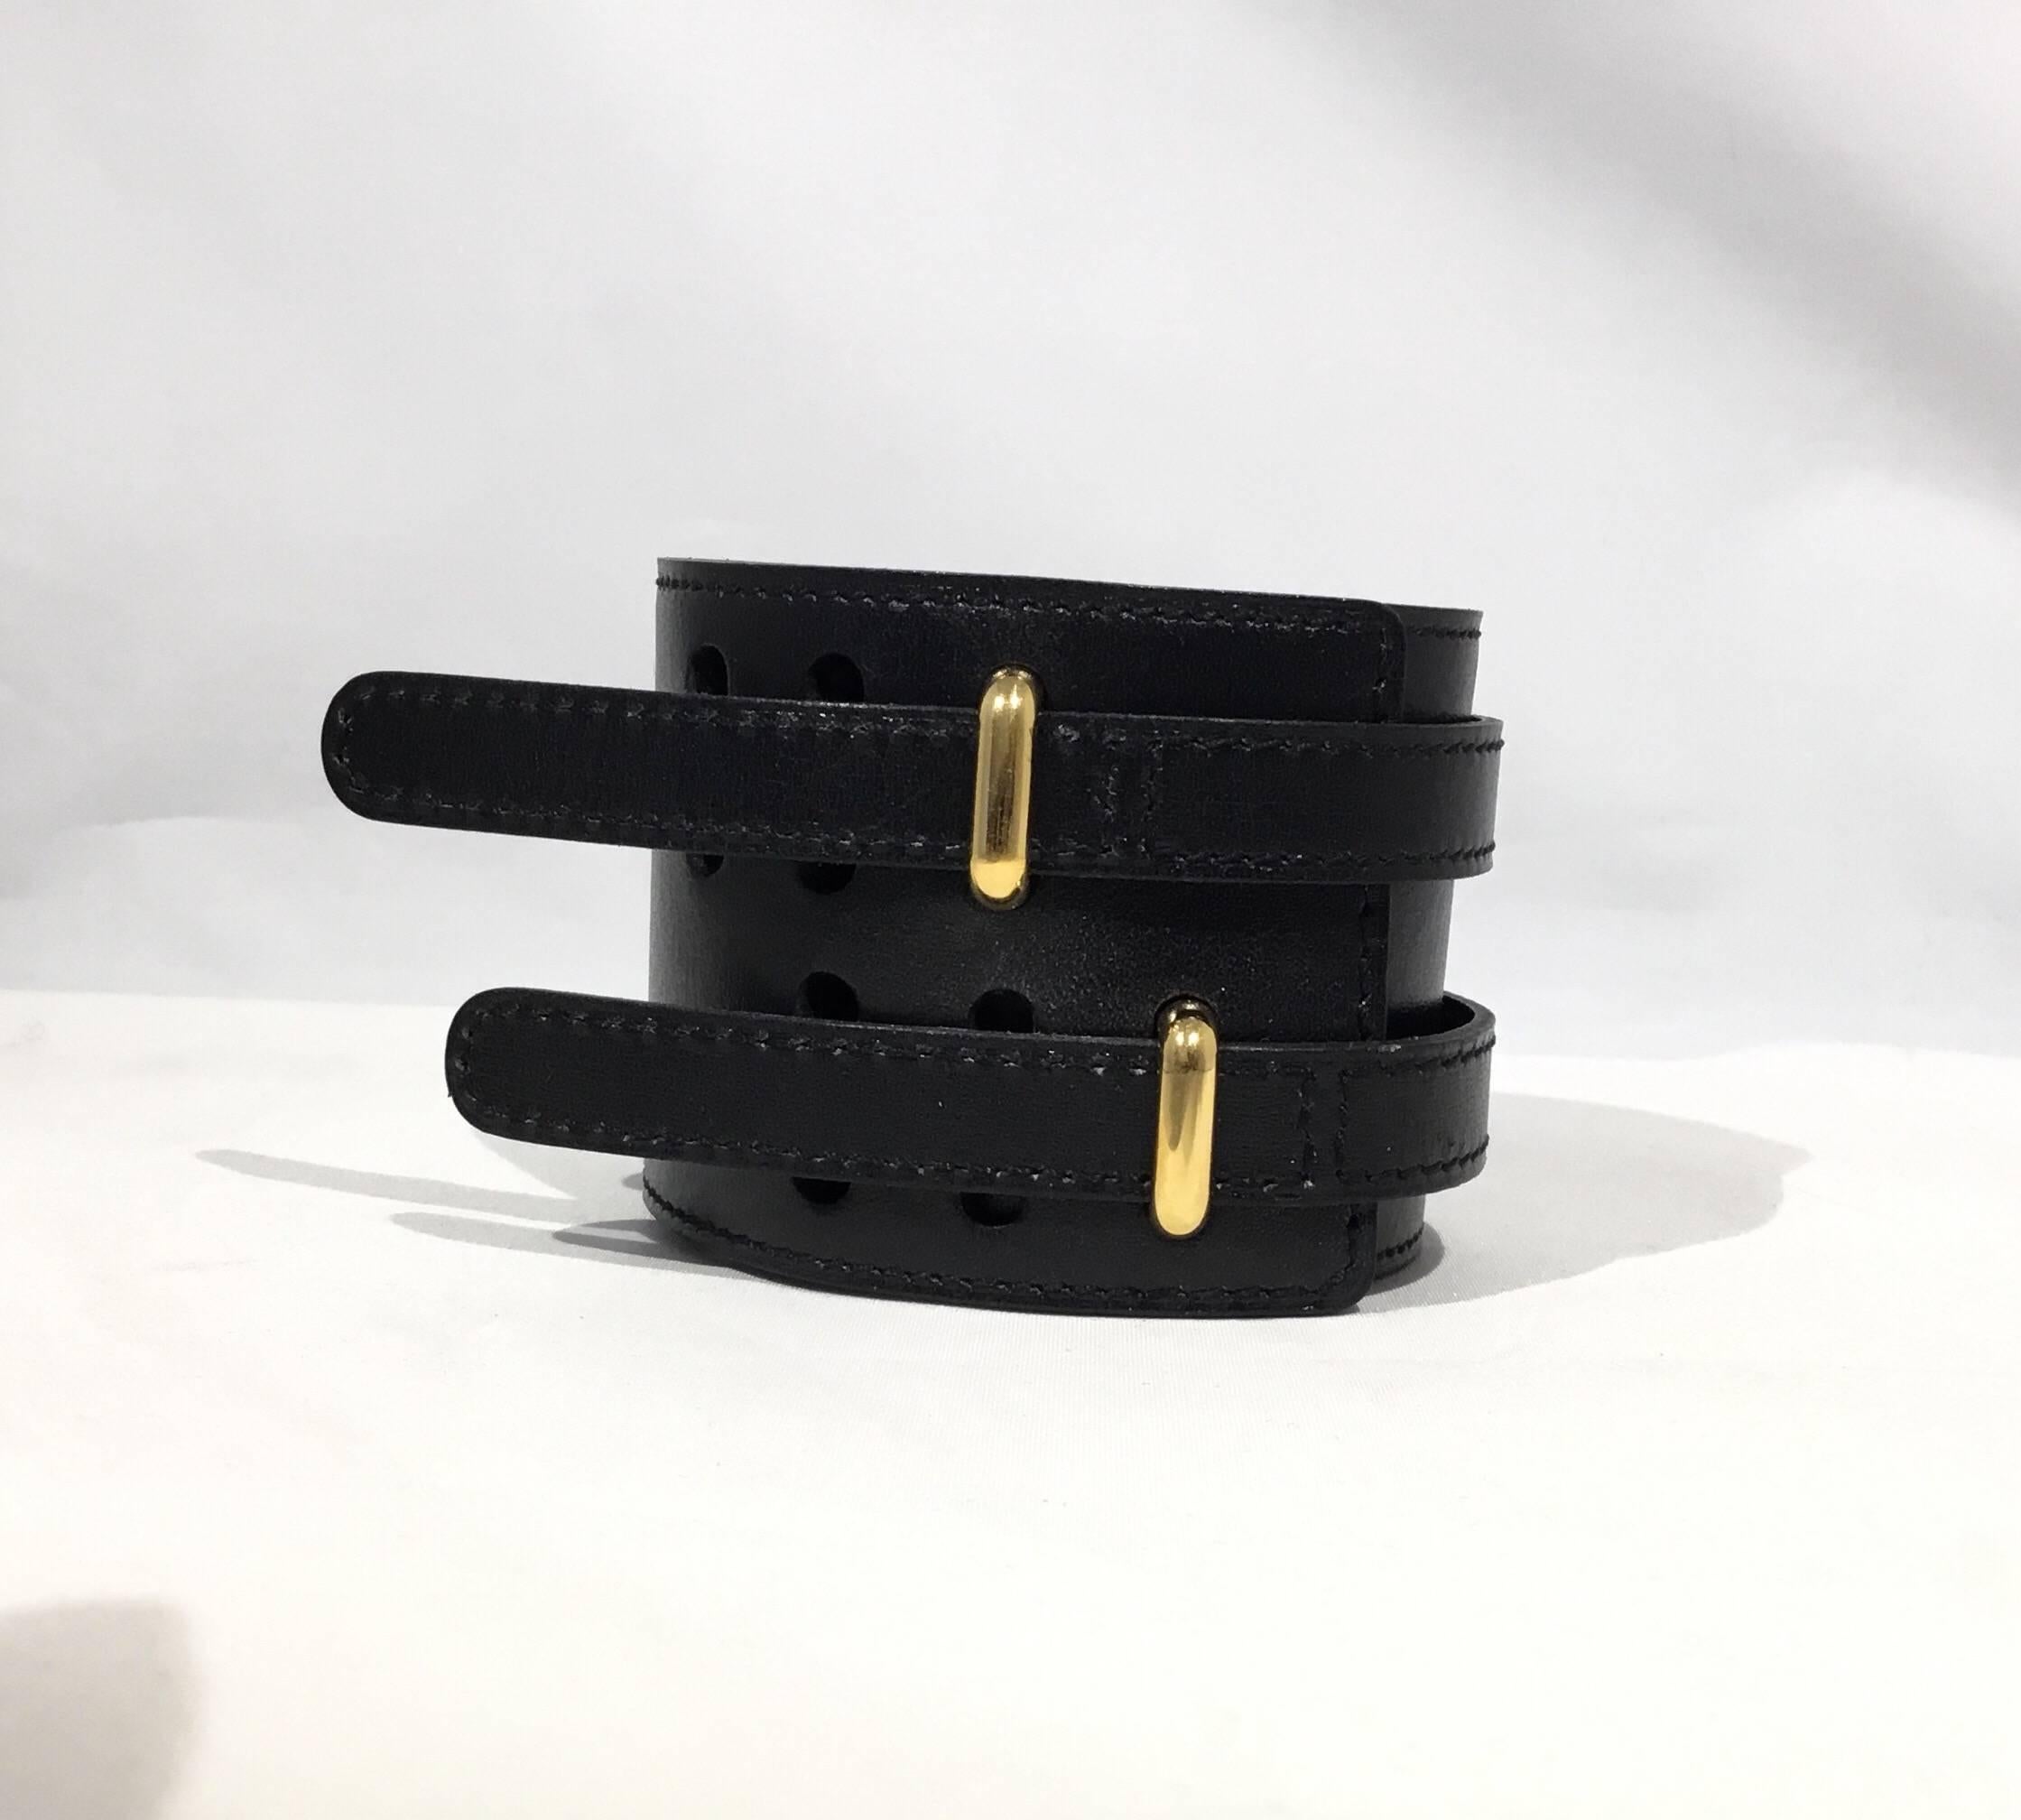 Hermes Paris black leather bracelet with gold hardware. Bracelet is adjustable and measures approximately 10 inches. Made in France. Stamps: M, F in a square.